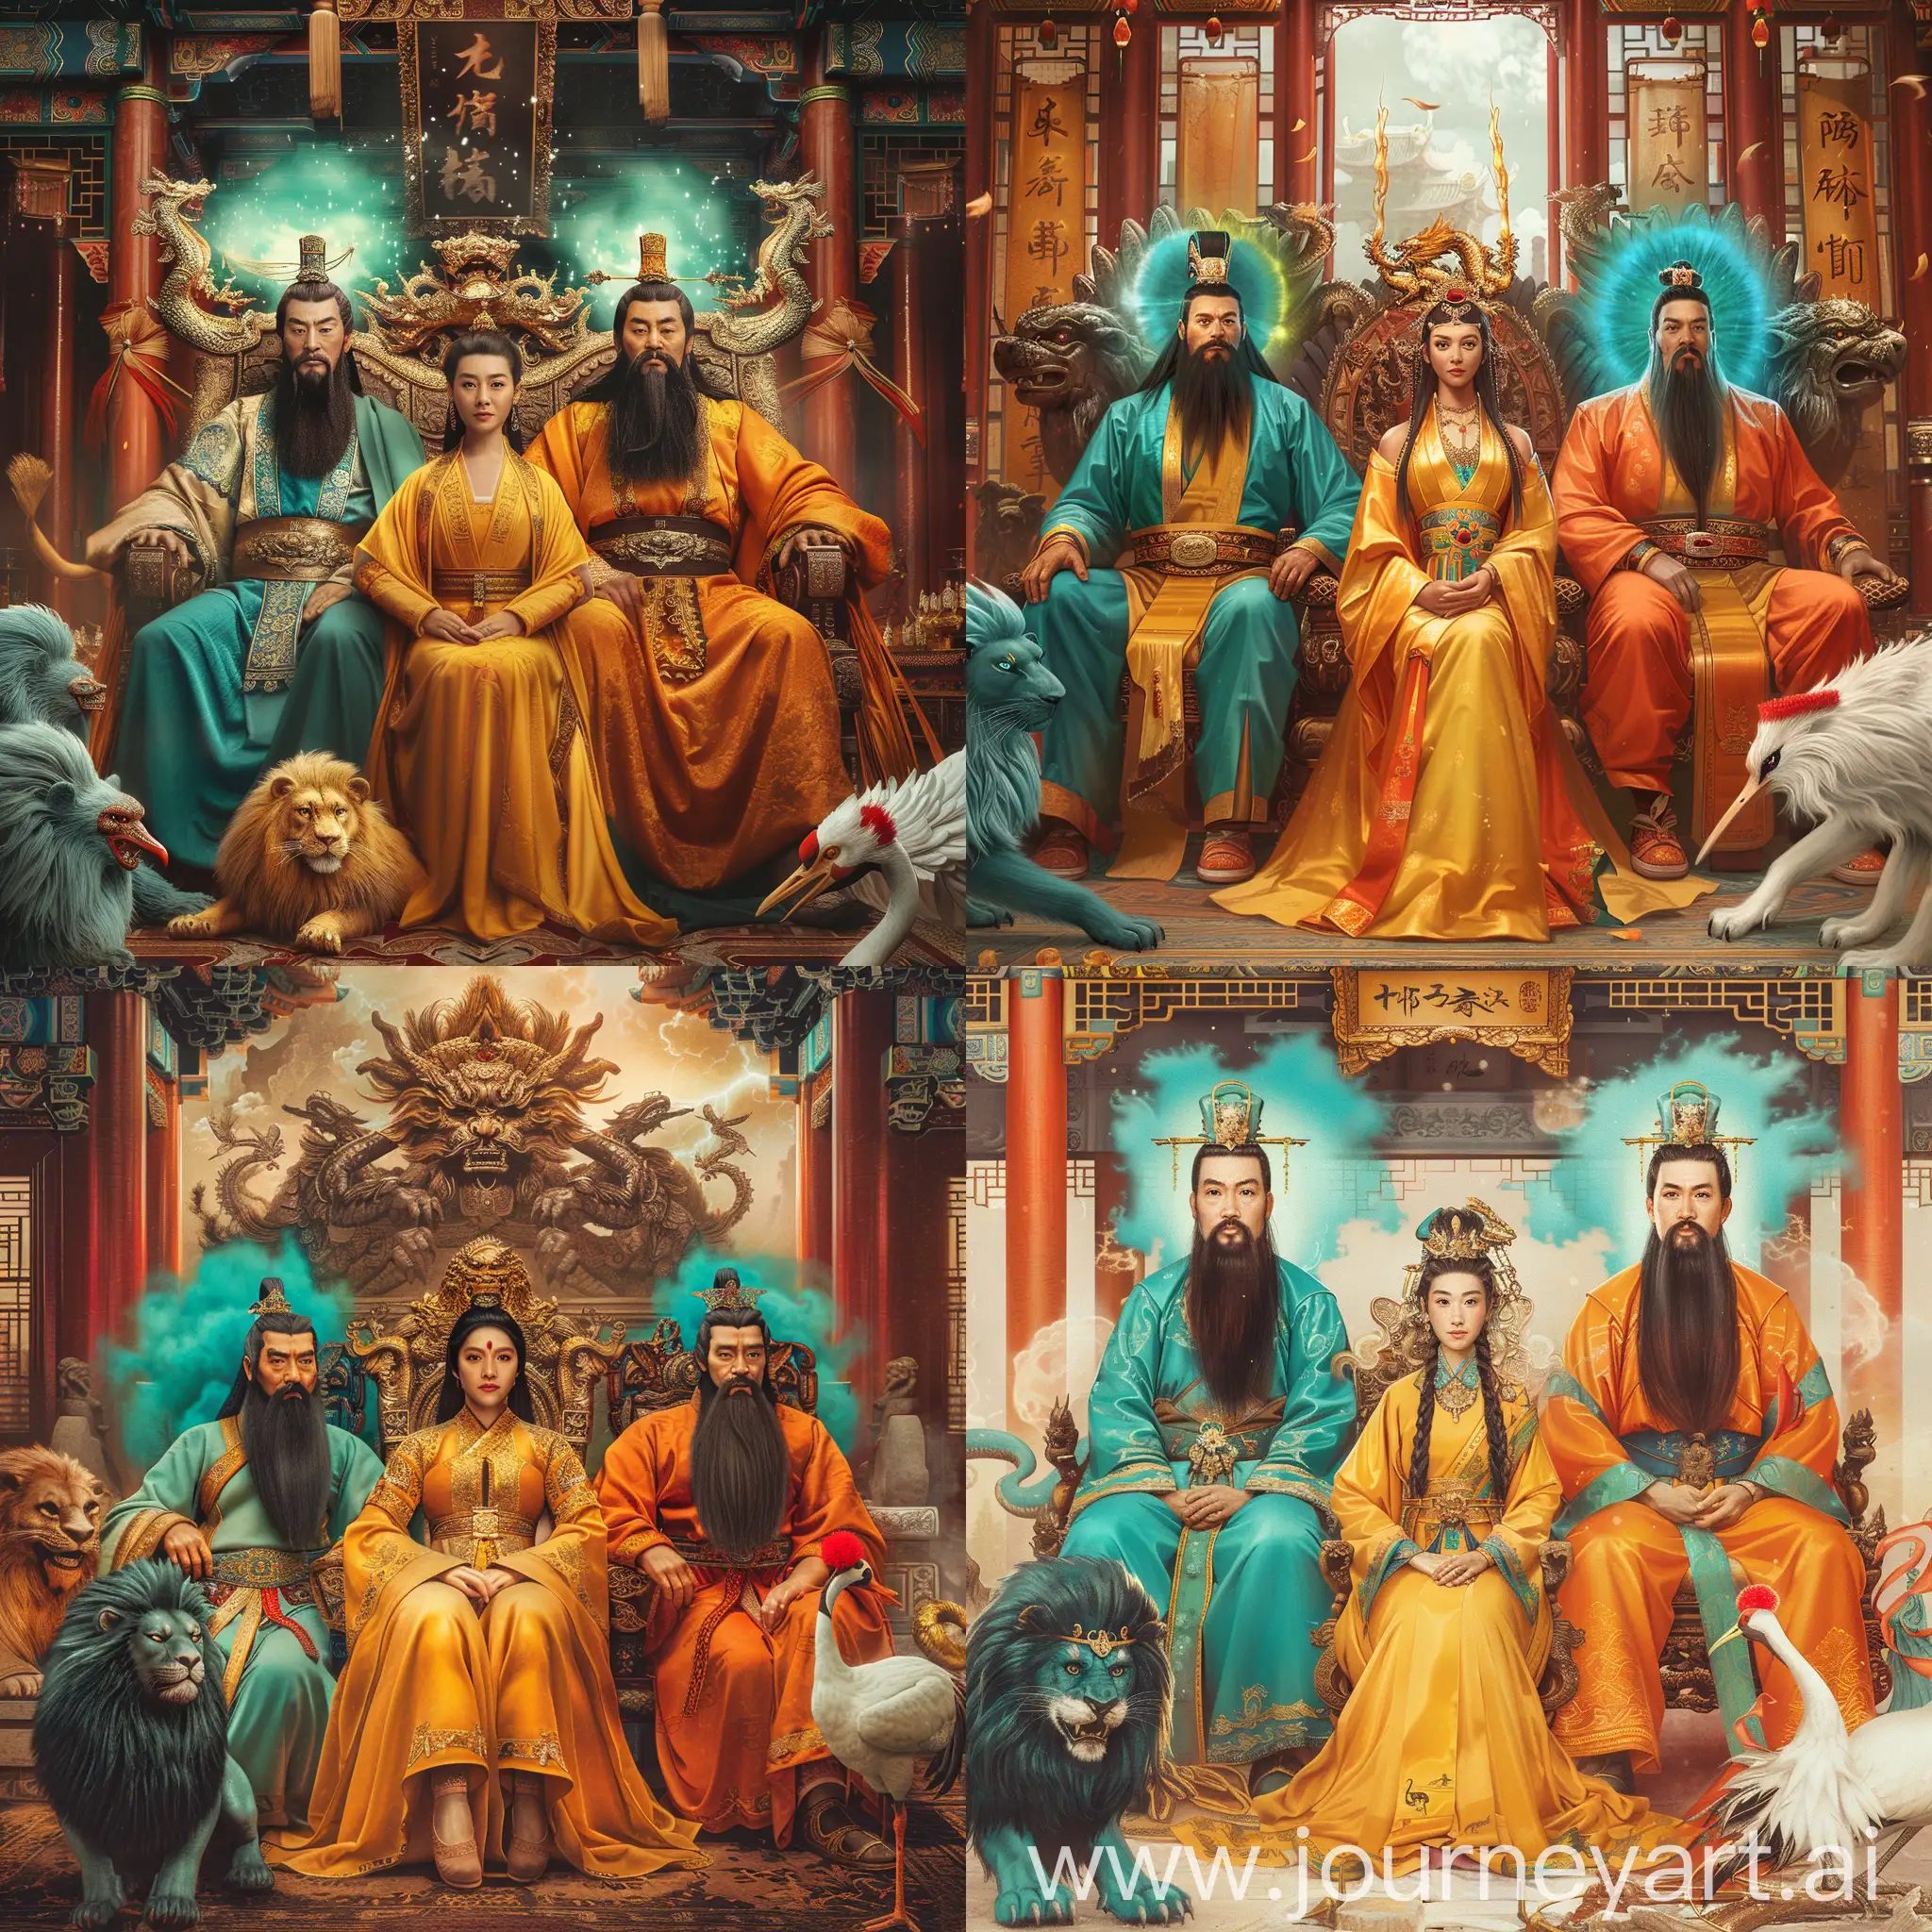 two Chinese Han dynasty Emperors with mid-long black beards and aurora behind their head are sitting on their thrones,

the left one in turquoise clothes,
the right one in orange clothes,

a 50 years old Chinese middle-aged empress sits on her throne in the middle, between the two emperors, she is in deep yellow clothes,

an azure lion on left side and a white red-crowned crane on right side, they are before the emperors,

they are all inside a splendid Chinese Palace,